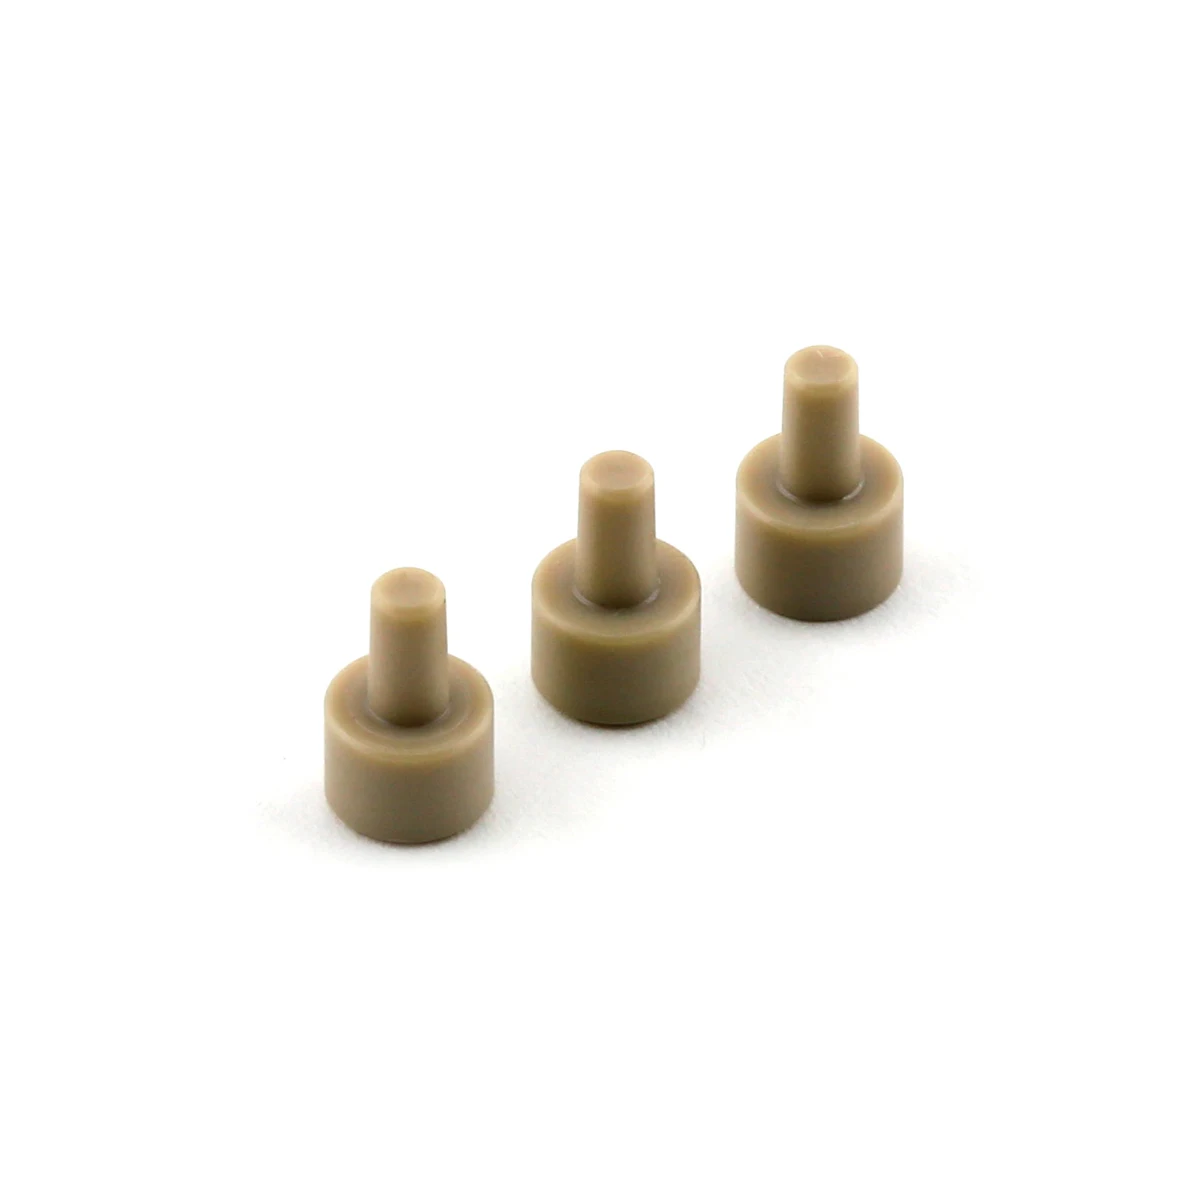 Delrin replacement inserts